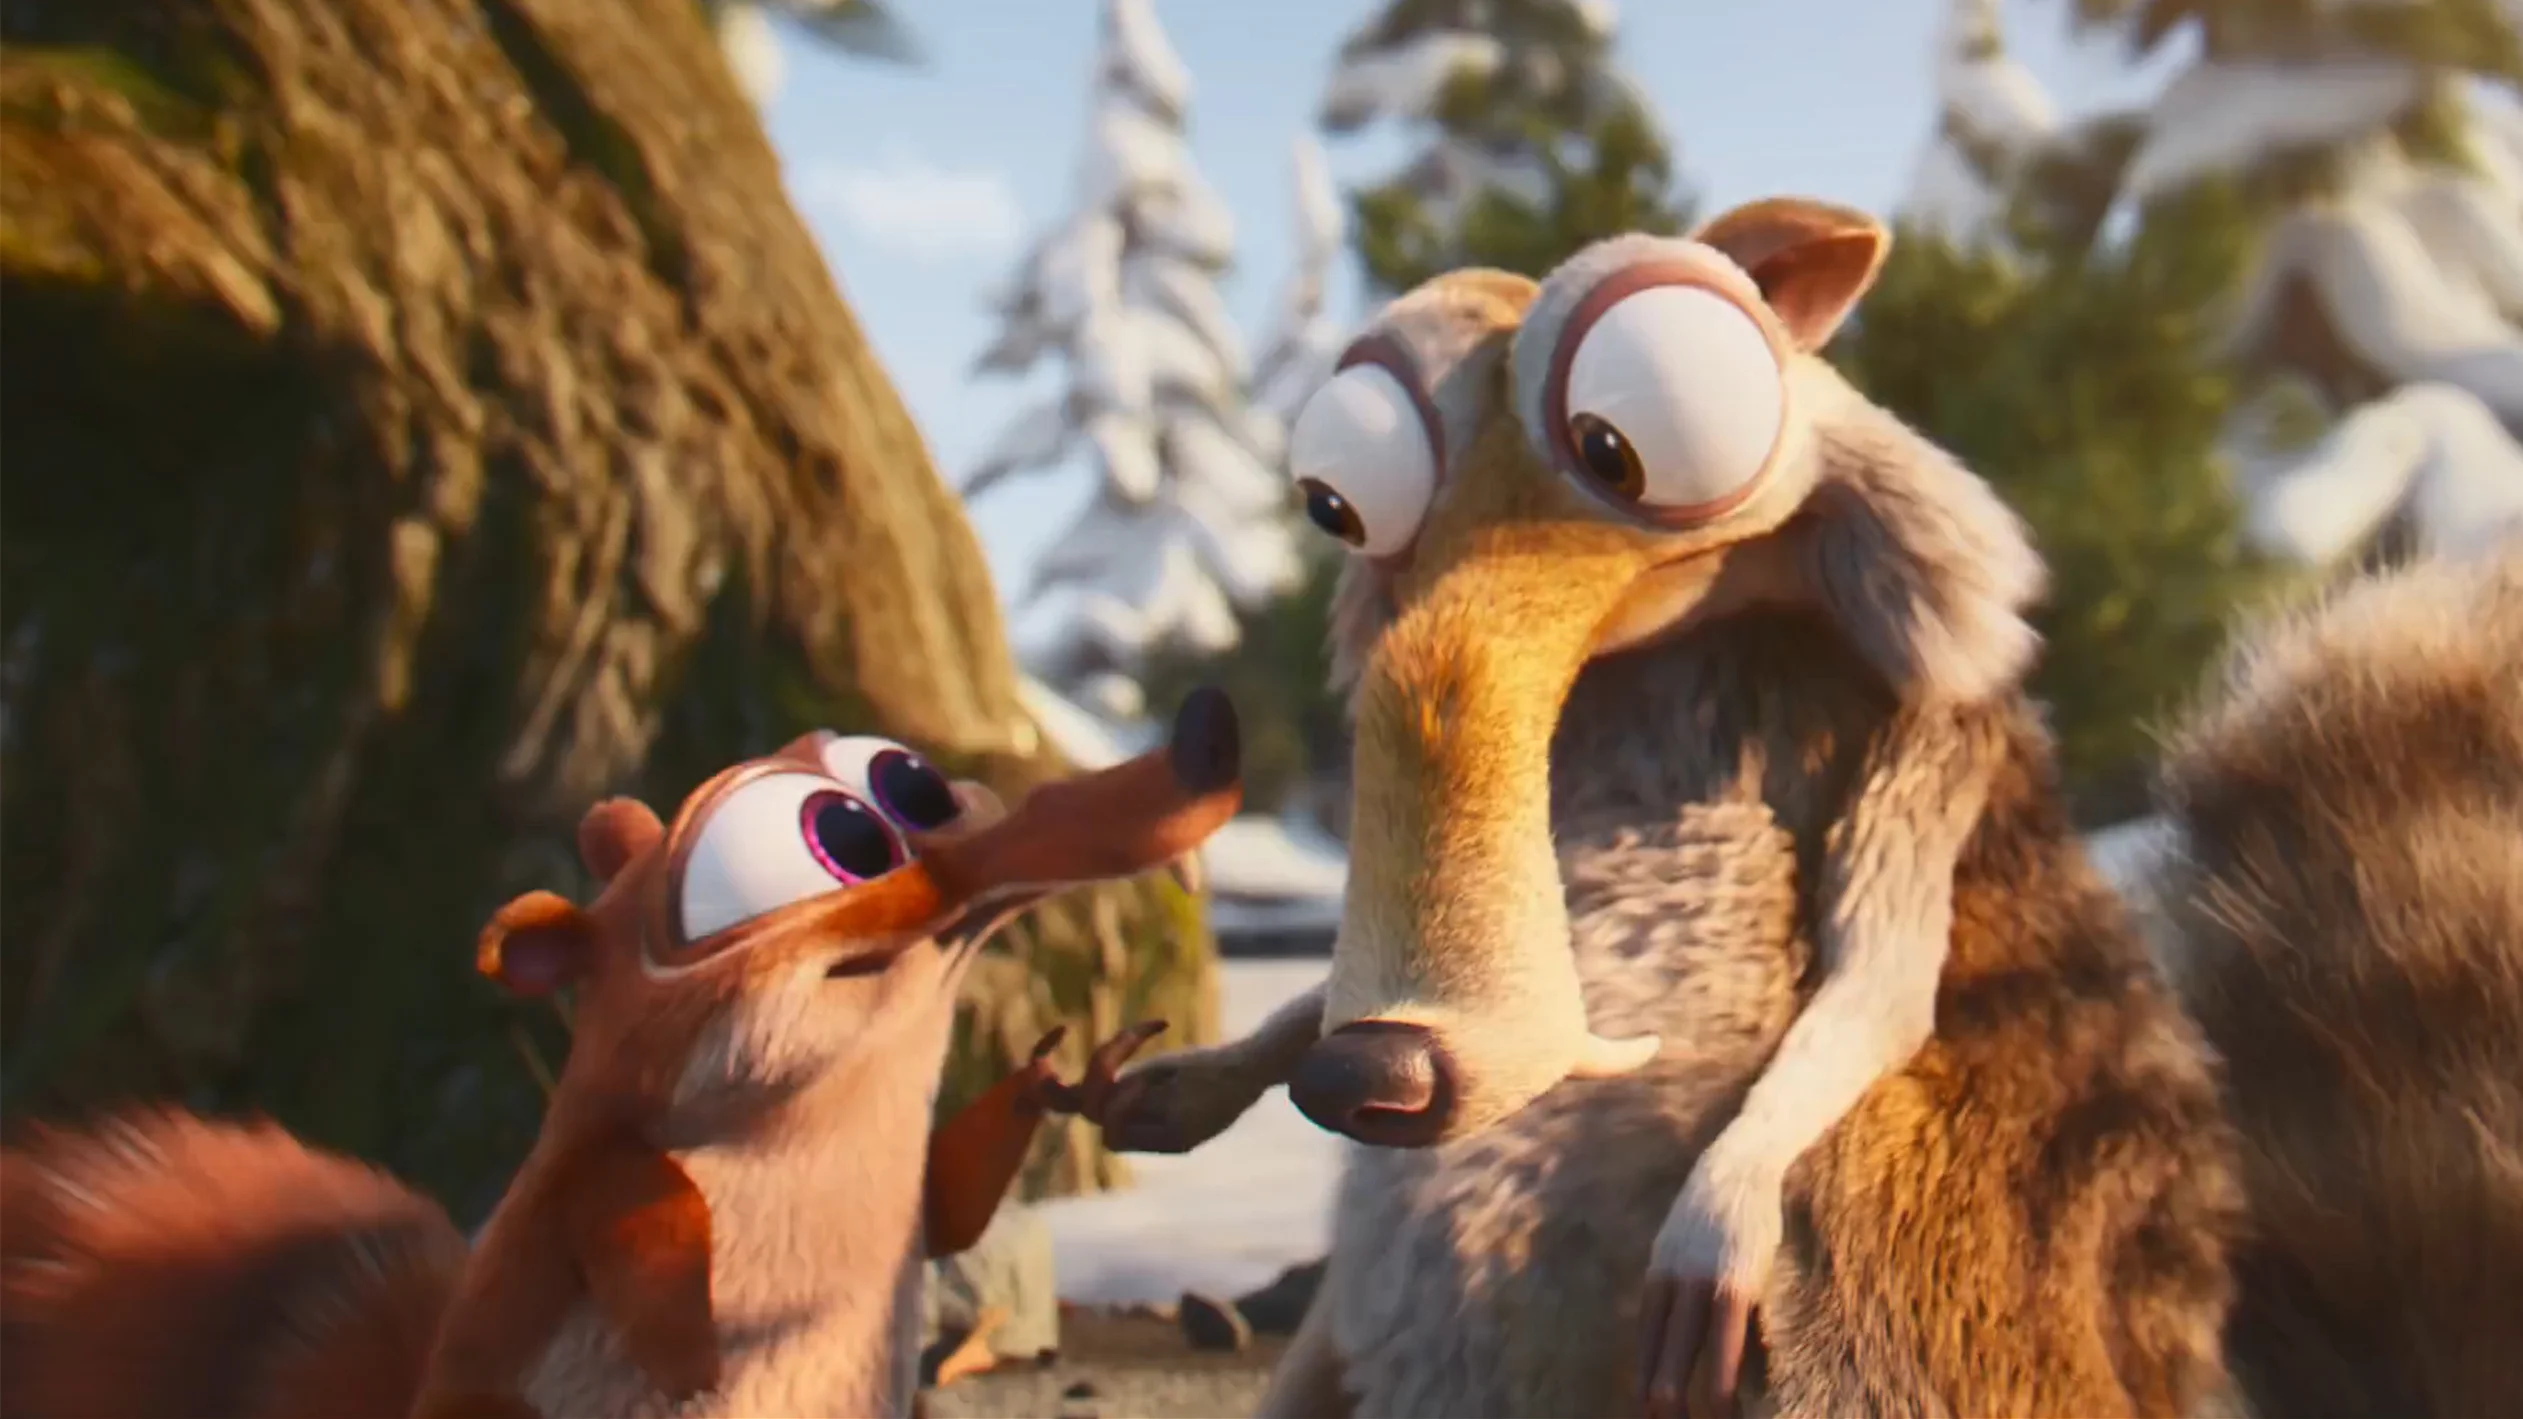 ice-age-scrat-tales-releases-official-trailer-it-will-be-live-on-april-13-1